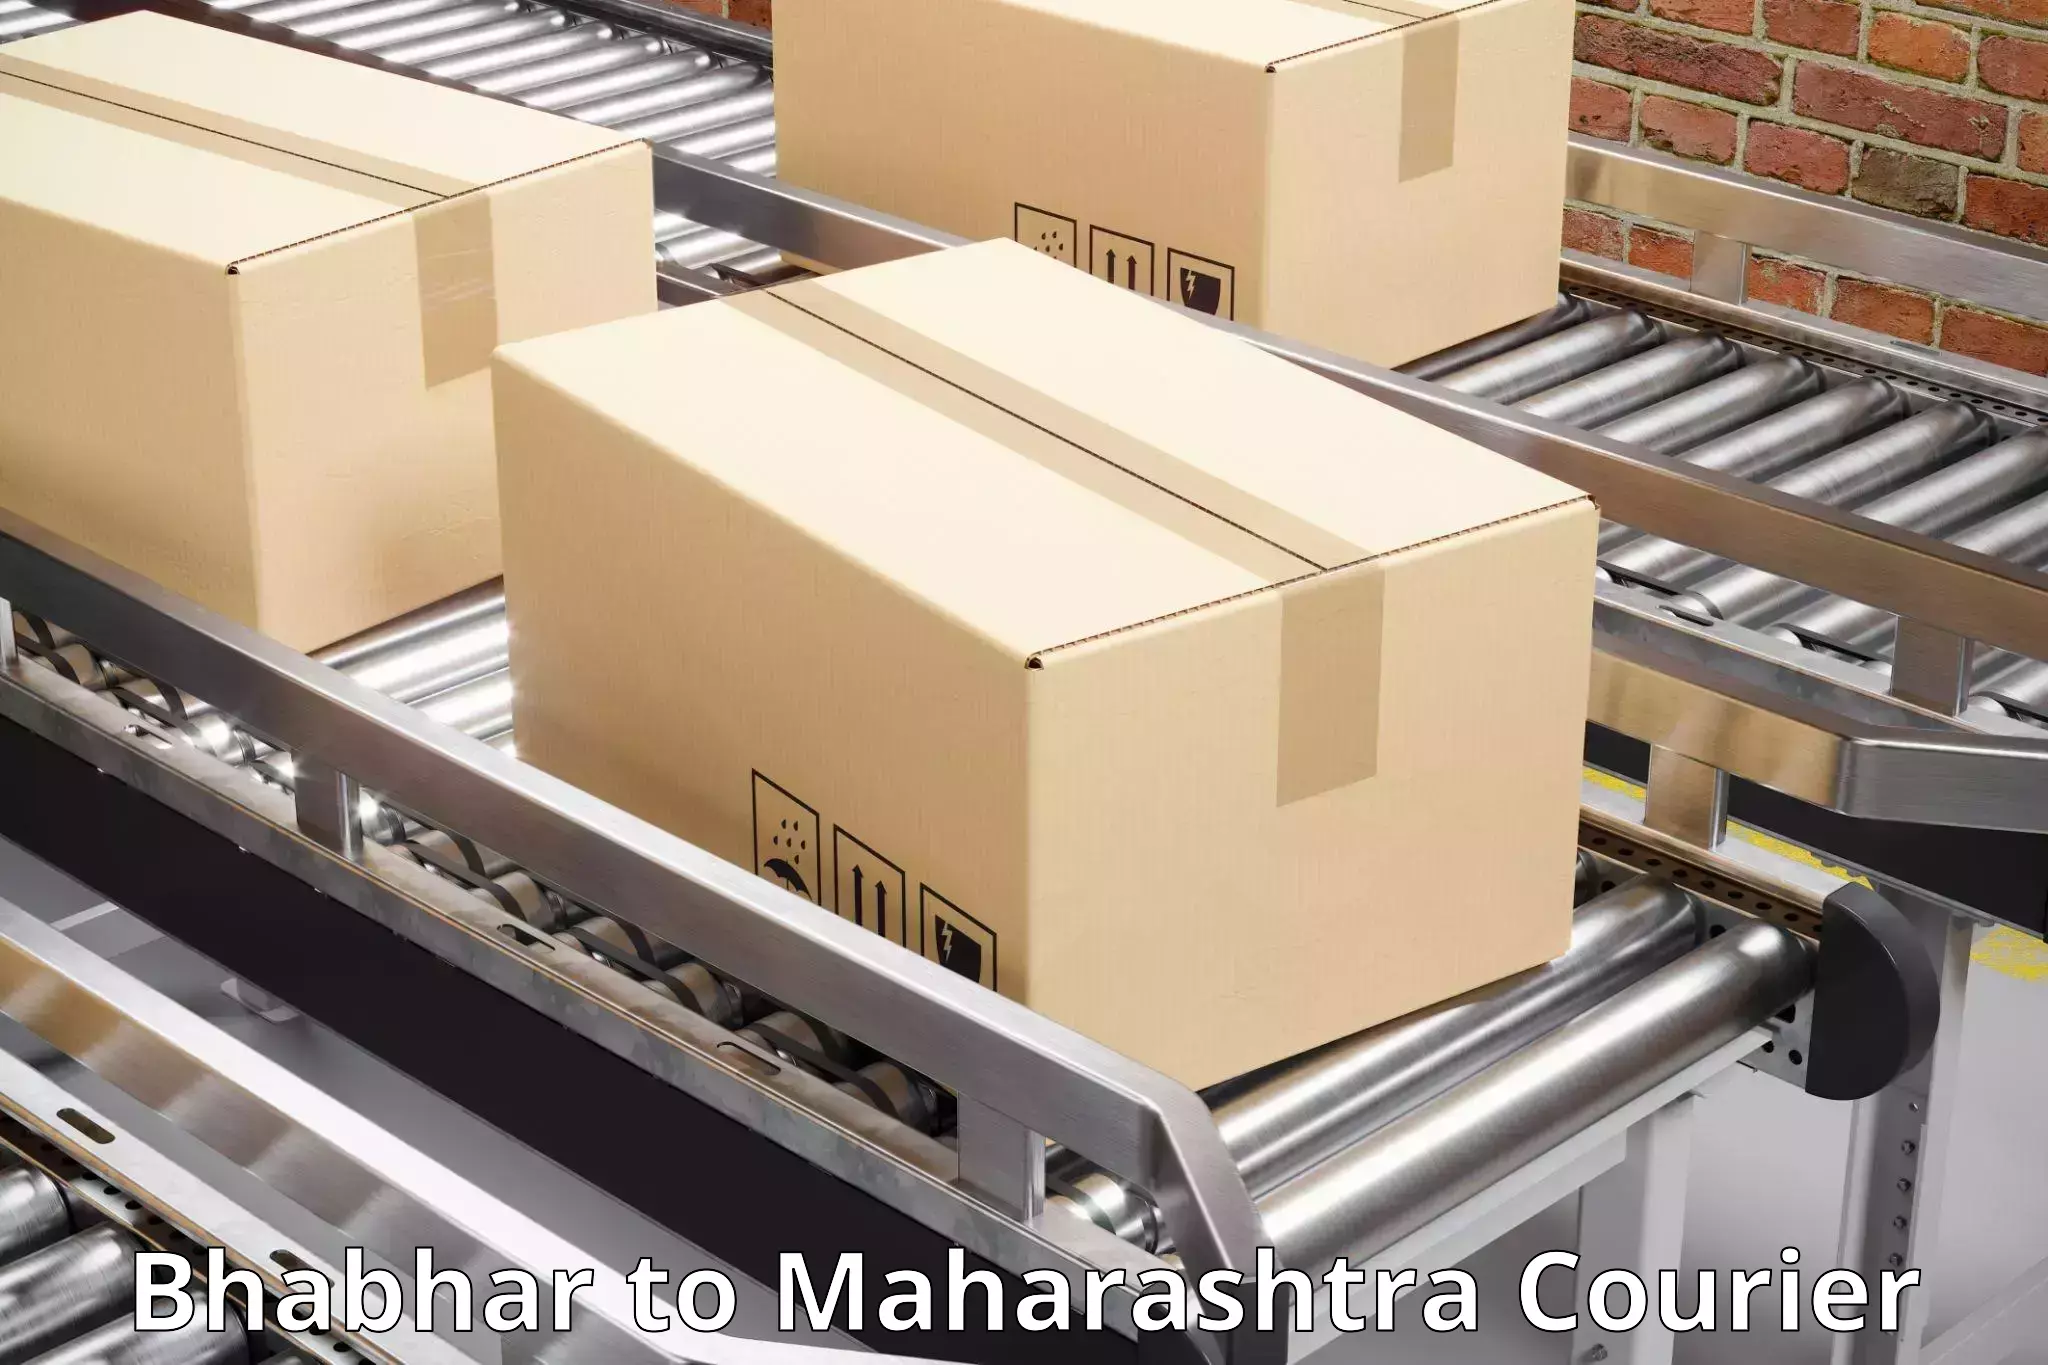 End-to-end delivery in Bhabhar to Mumbai University